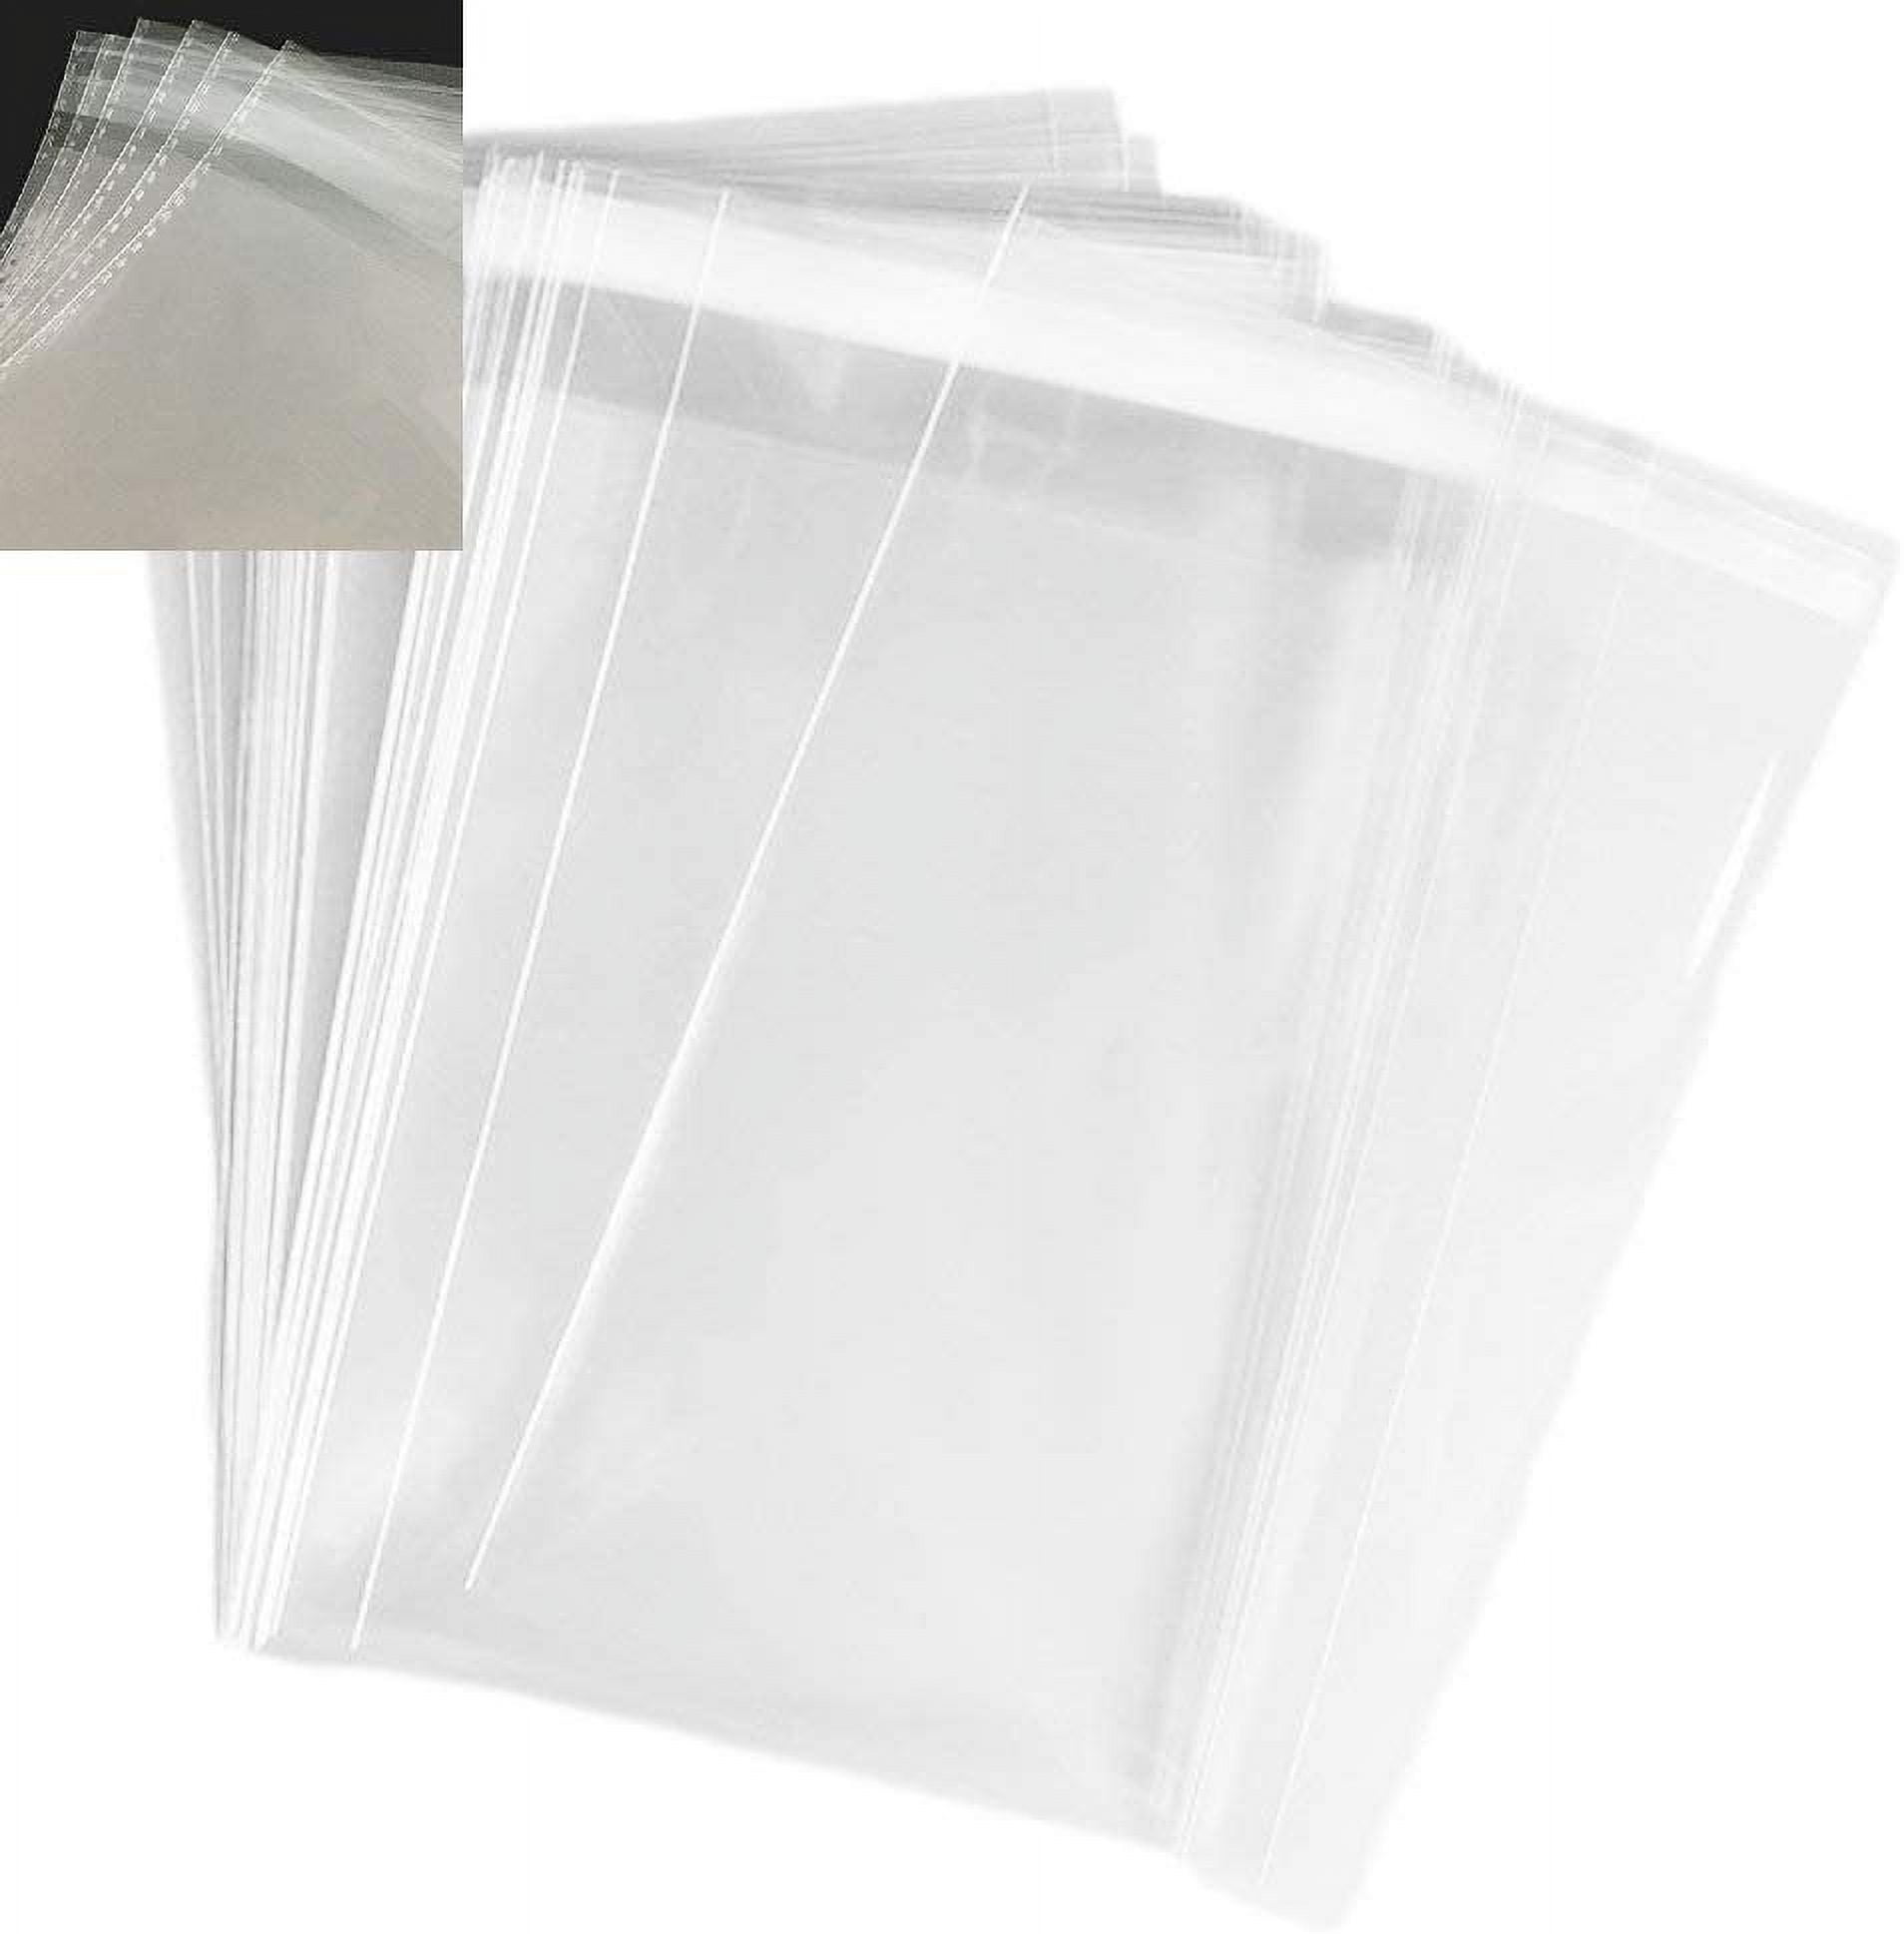 888 Display USA, Inc 100 Bags - 8 x 10 2mil Ke Crystal Clear Protective Closure Bags with Self Adhesive Flap - Clear Resealable Cello/Cellophane Ba